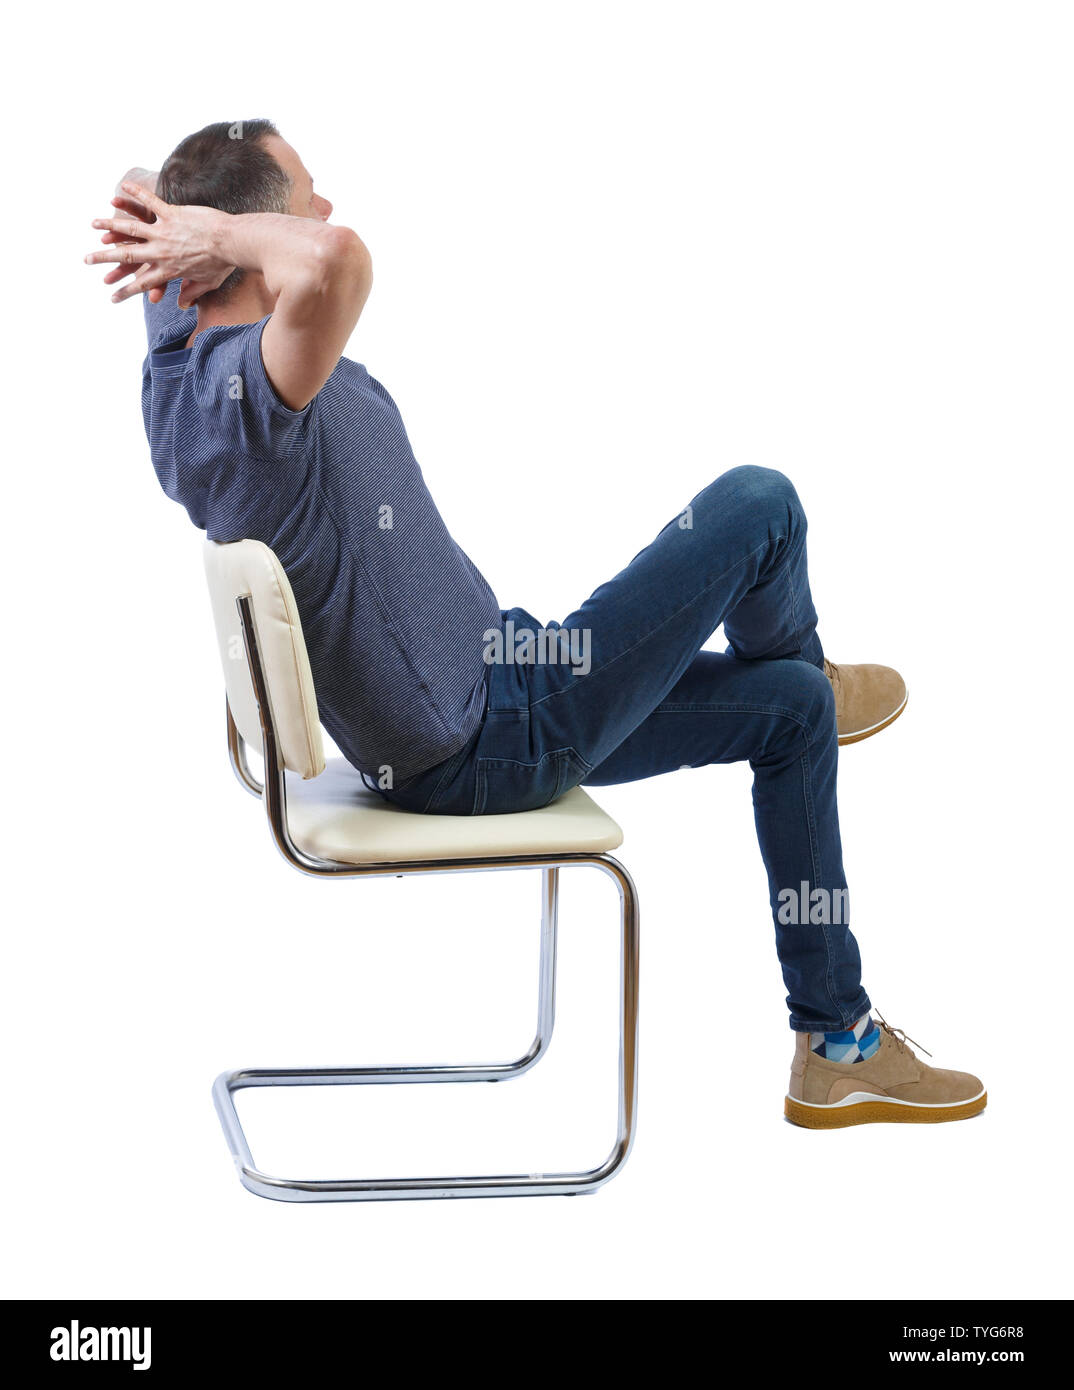 Side view of a man sitting on a chair. Rear view people collection. The student is sitting on a chair relaxed leaning back. backside view of person. I Stock Photo